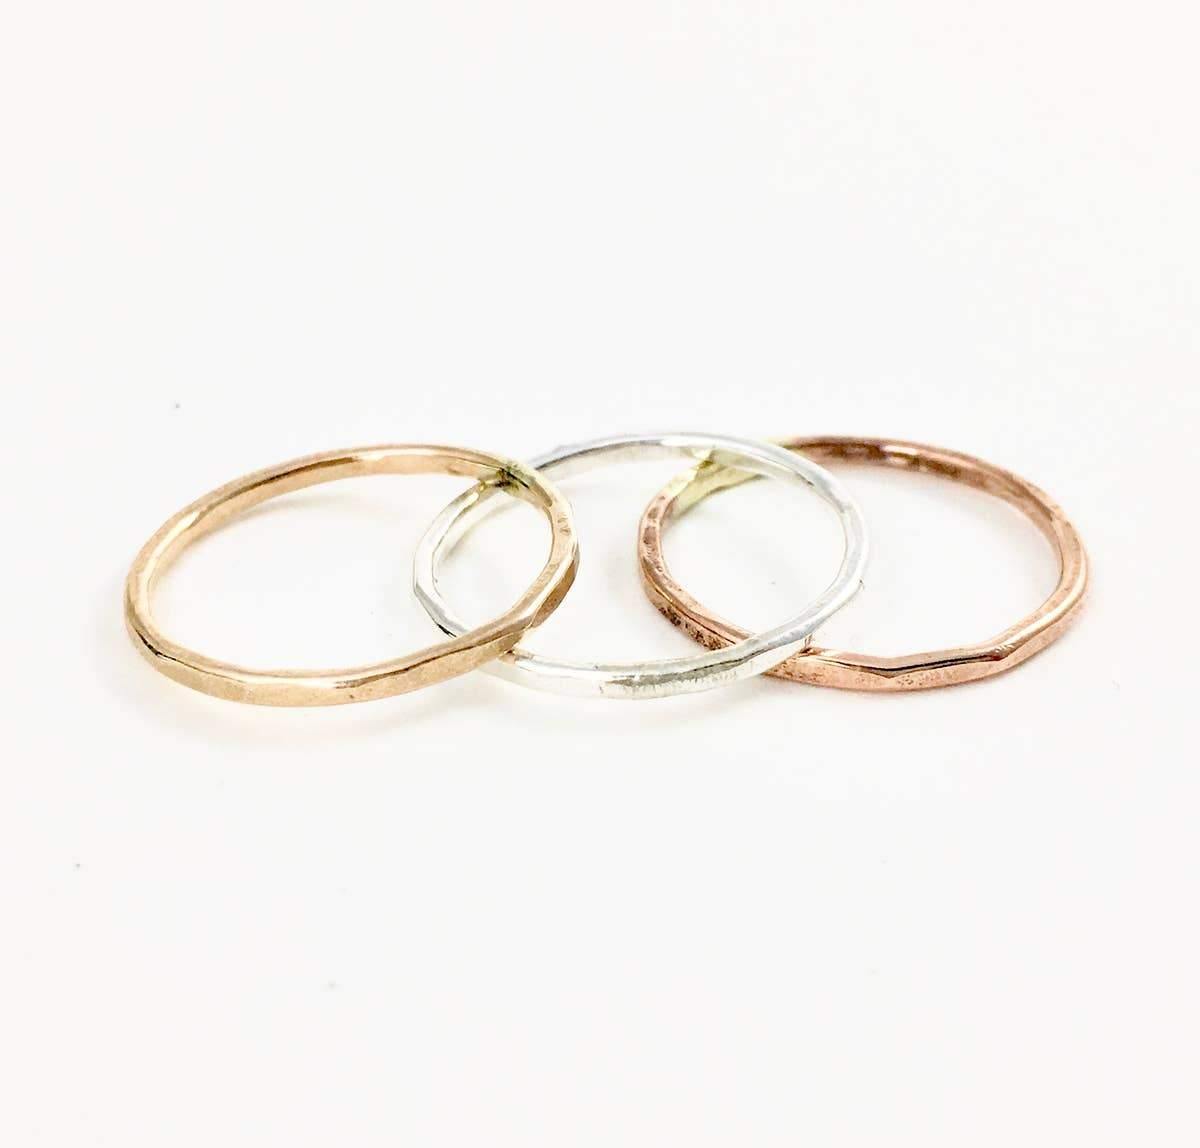 Handmade Hammered Stacking Ring in Yellow Gold Fill | Fruit of the Vine Boutique 